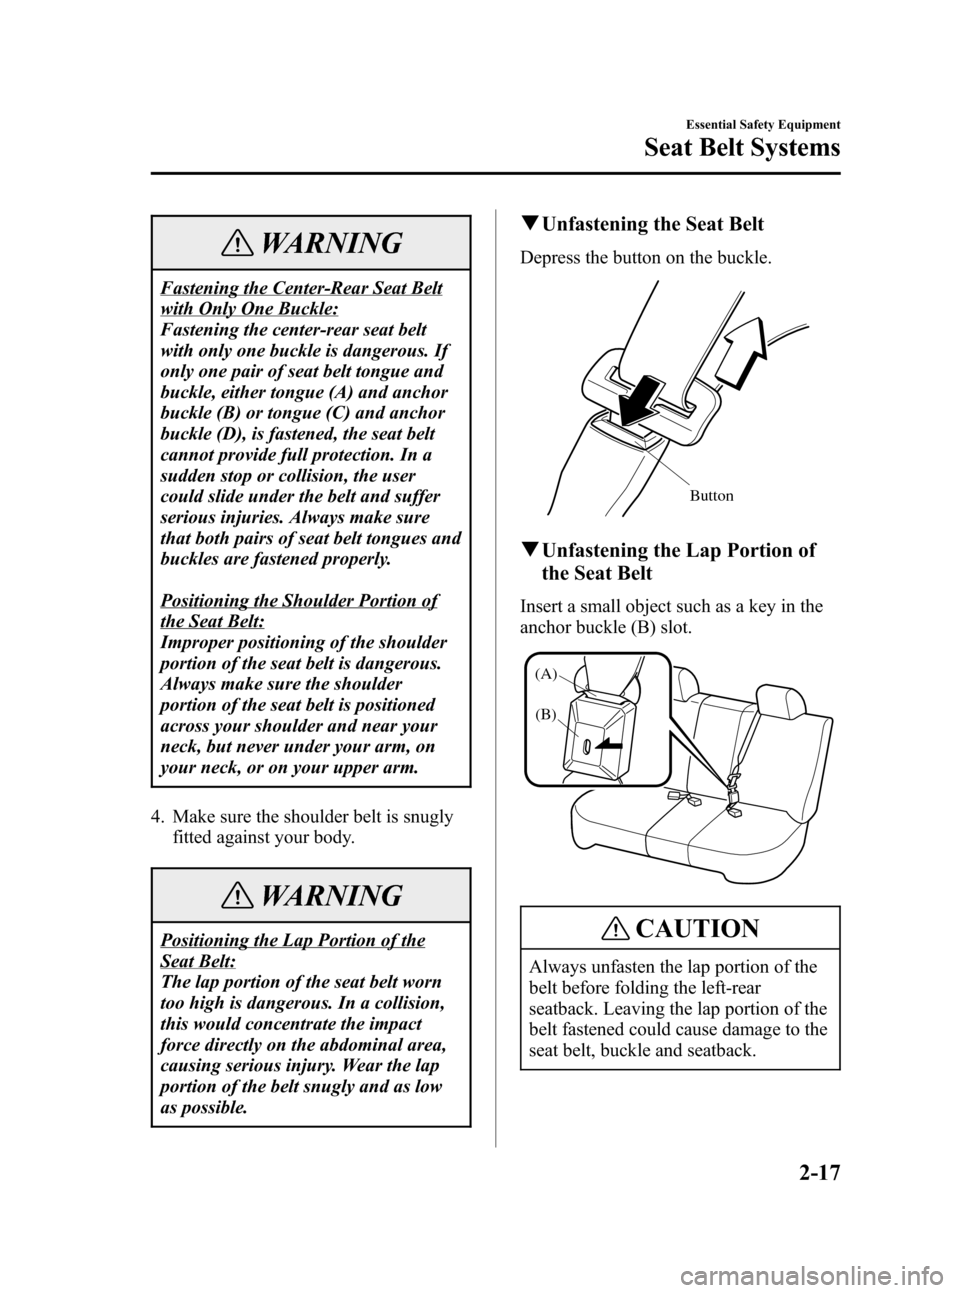 MAZDA MODEL 3 HATCHBACK 2006   (in English) Owners Guide Black plate (31,1)
WARNING
Fastening the Center-Rear Seat Belt
with Only One Buckle:
Fastening the center-rear seat belt
with only one buckle is dangerous. If
only one pair of seat belt tongue and
buc